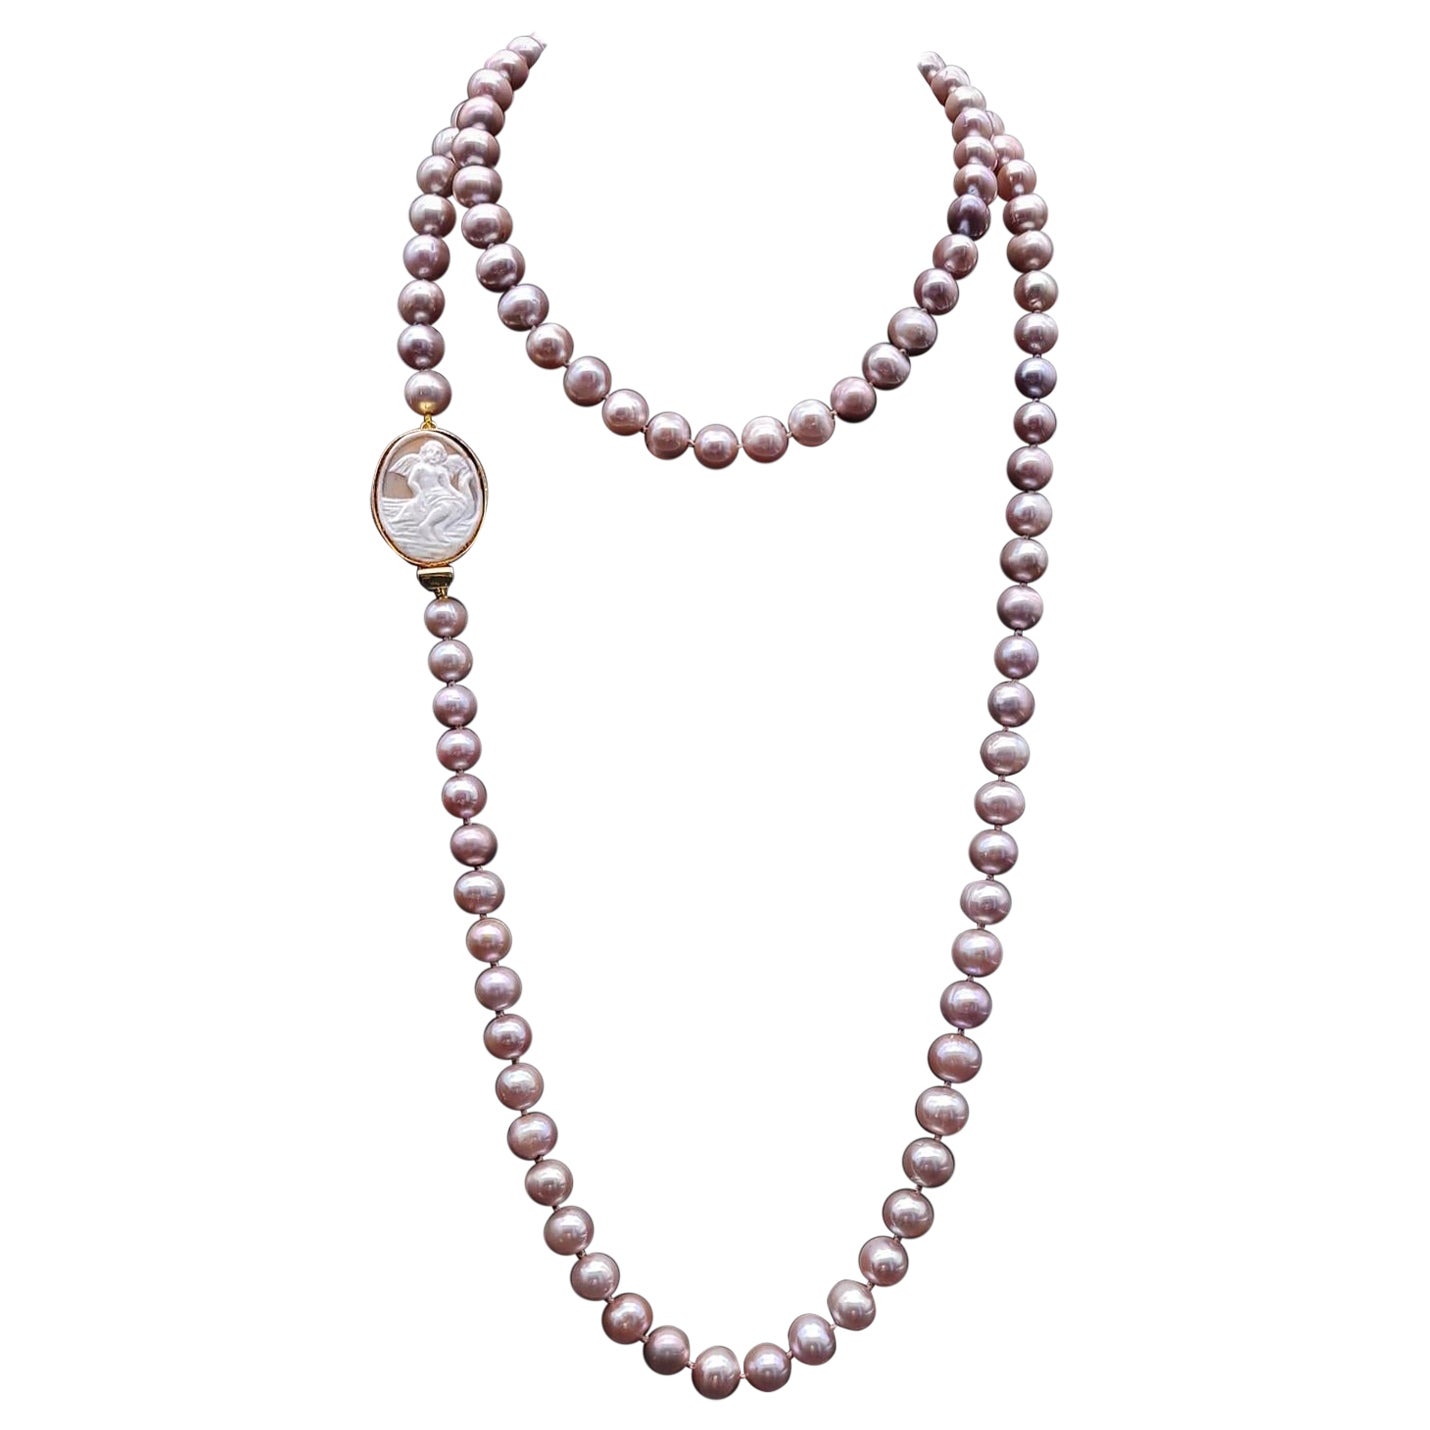 A.Jeschel Spectacular Angelskin pink freshwater Pearl necklace.